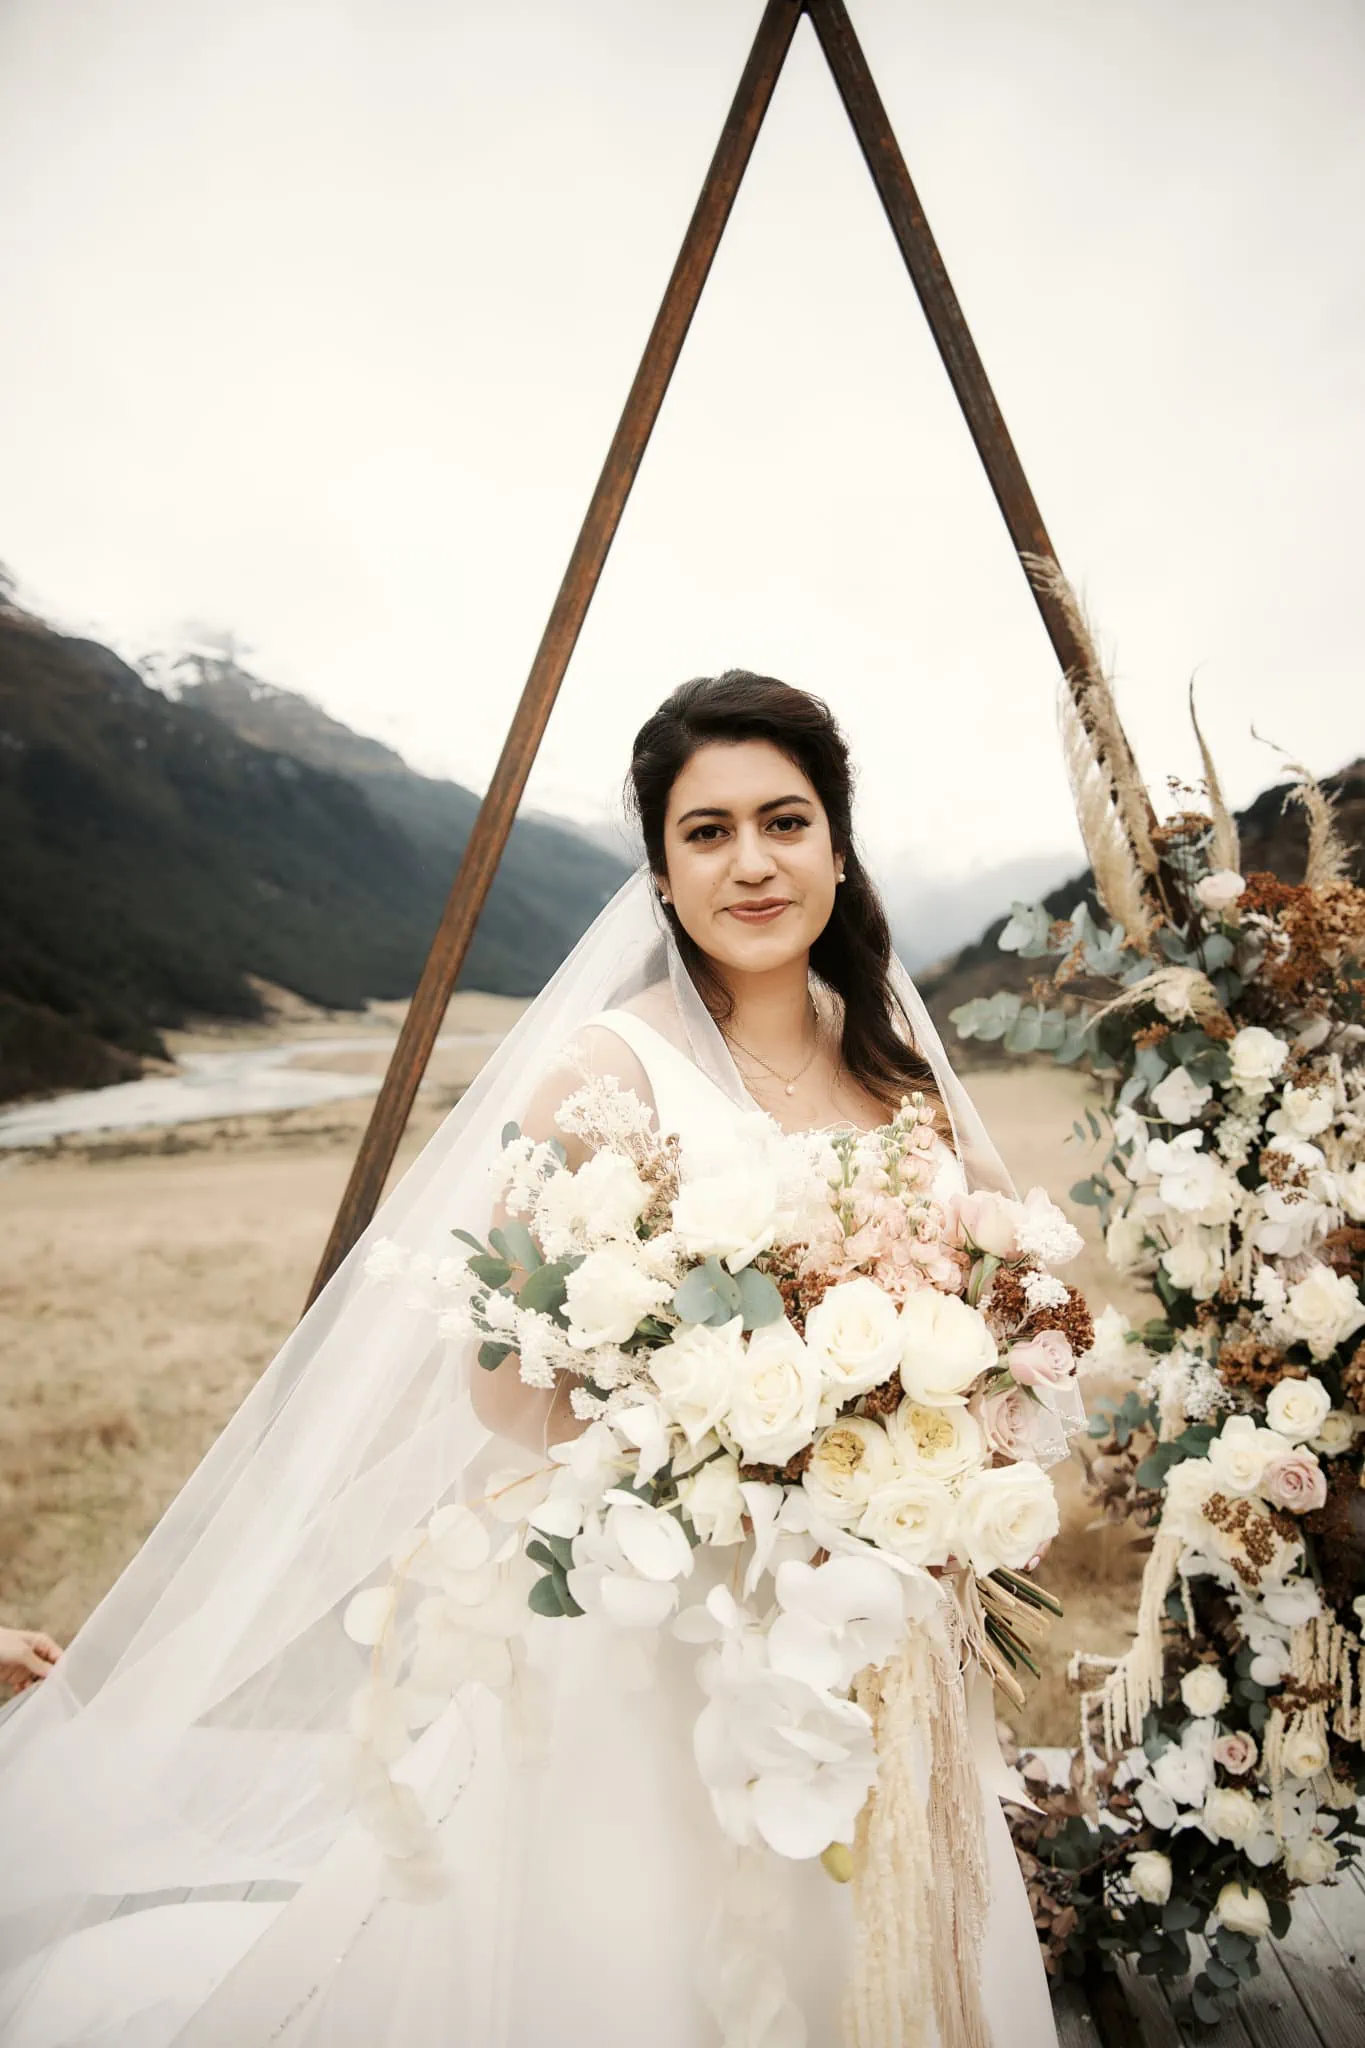 Michelle, wearing a white wedding dress, stands in front of a mountain during her Rees Valley Station elopement wedding with Vedran.